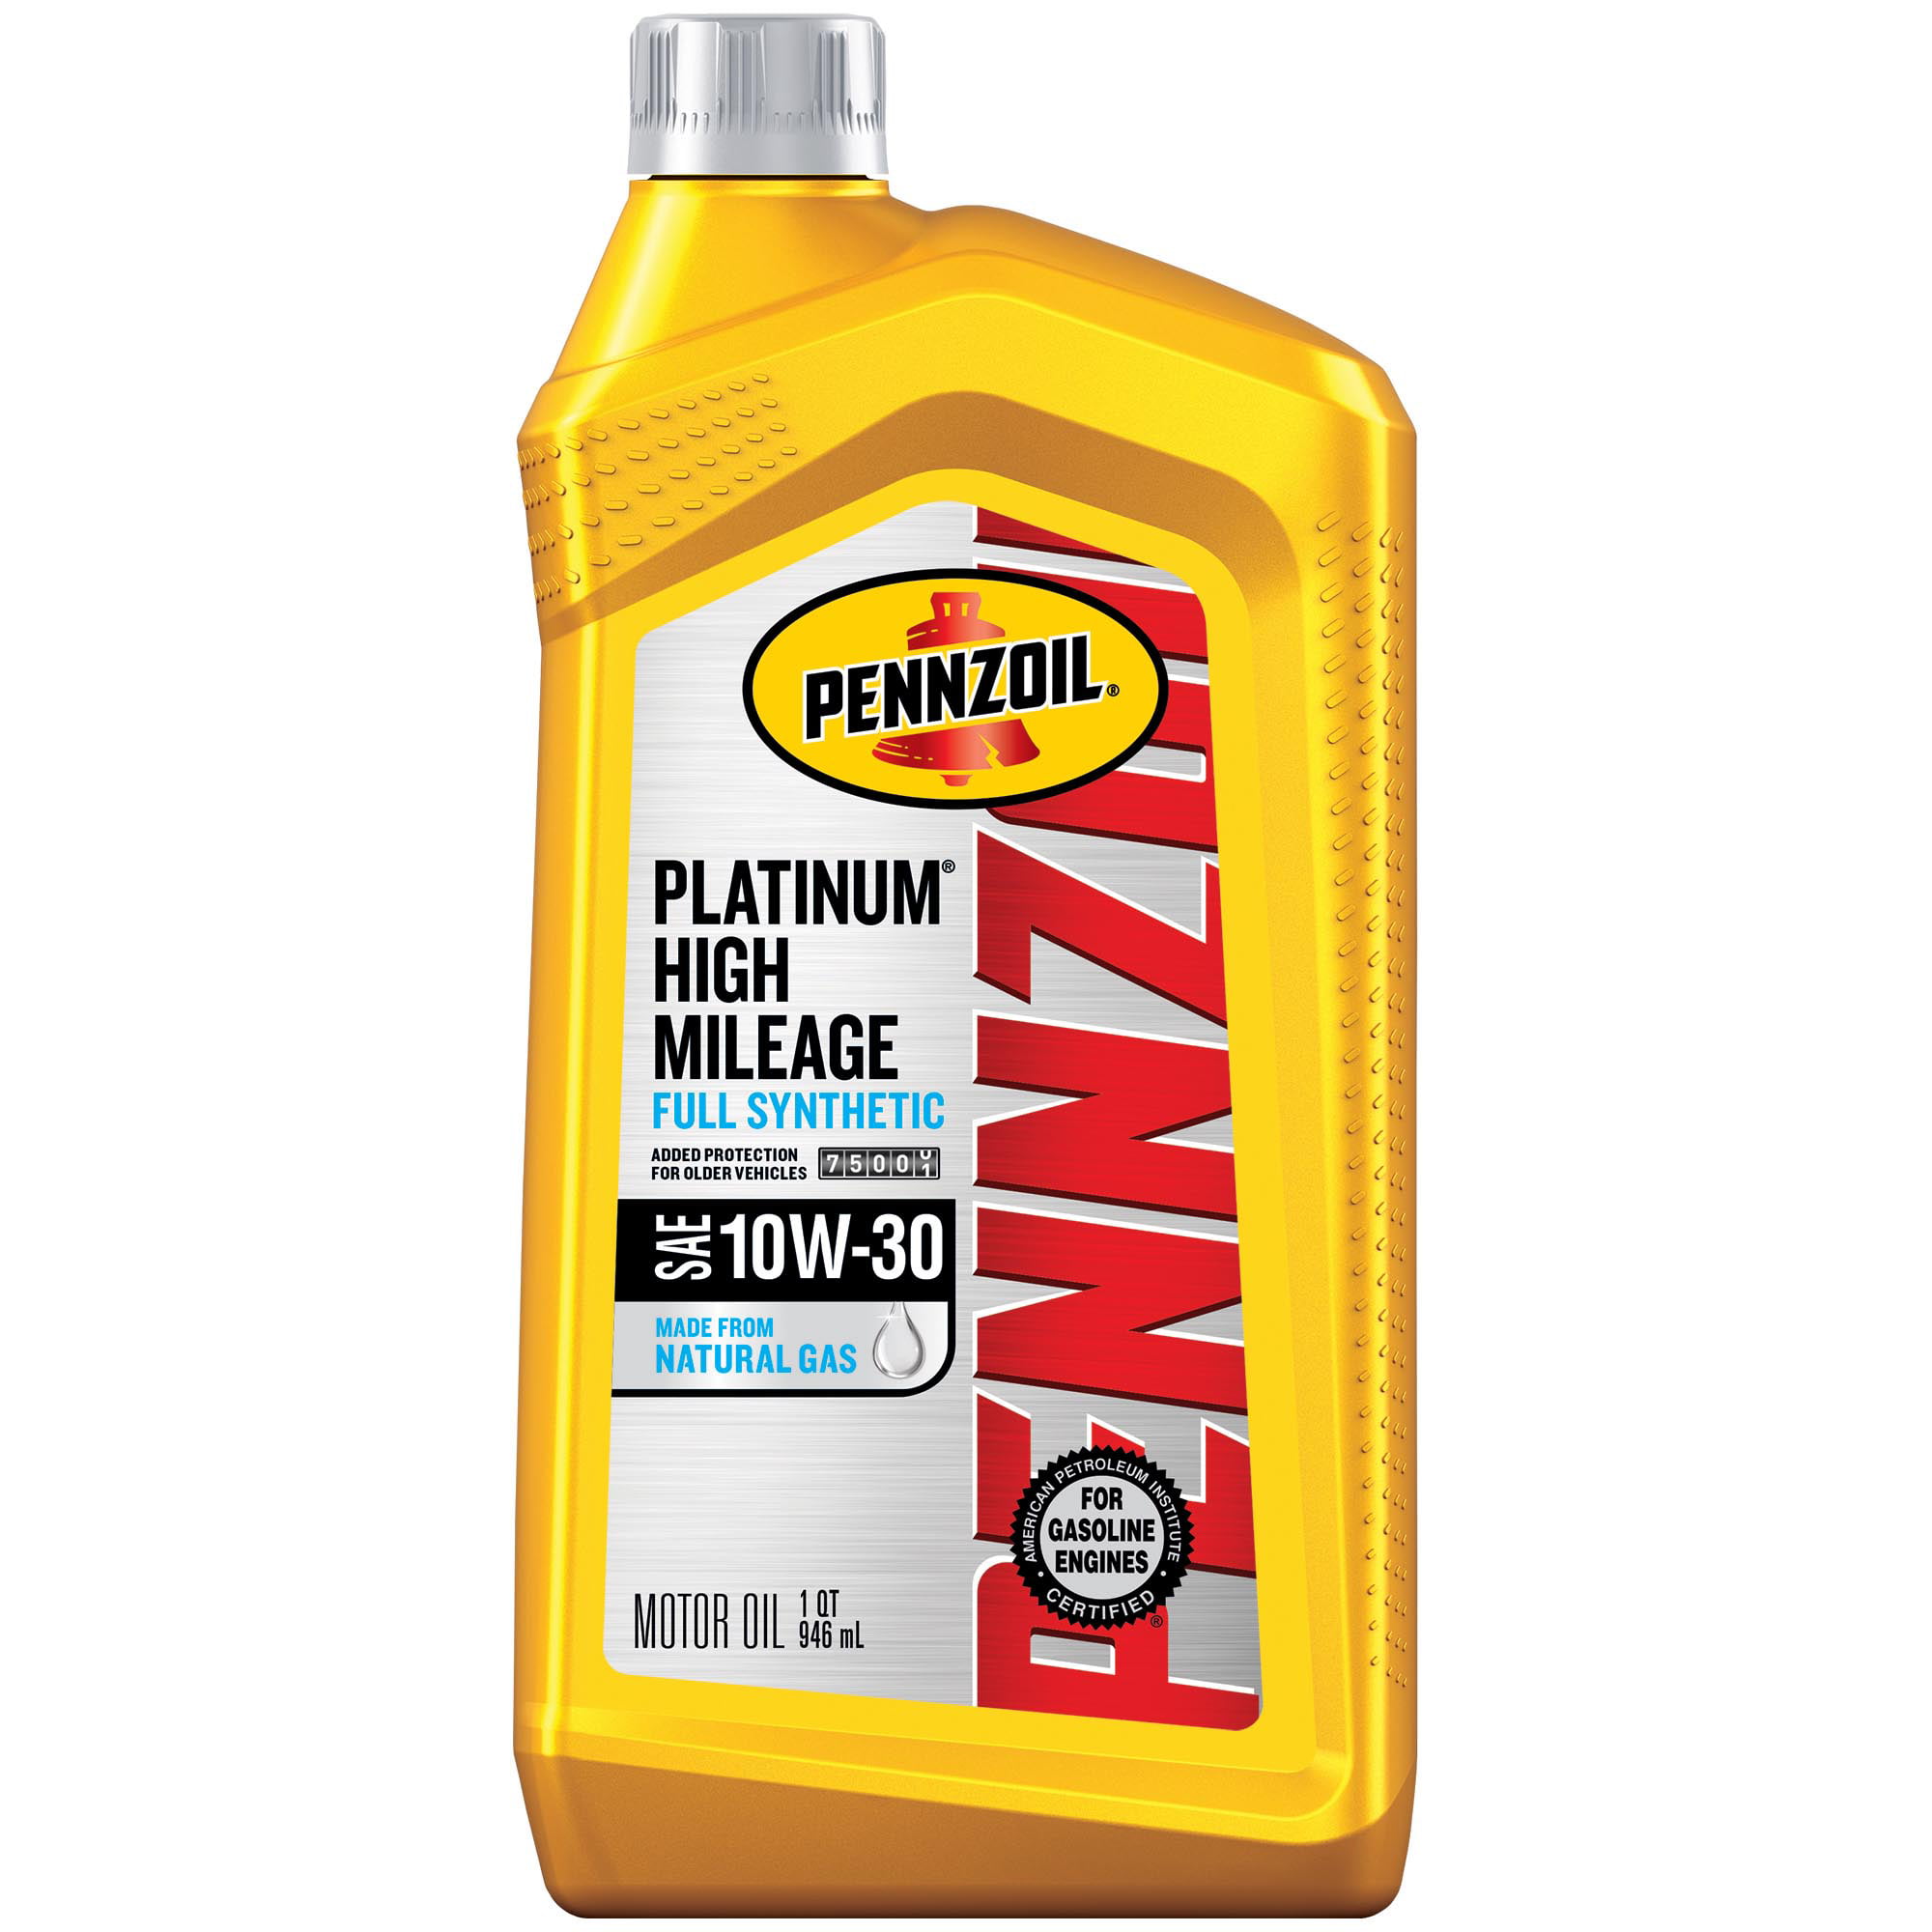 Pennzoil Platinum High Mileage 10w 30 Full Synthetic Motor Oil 1